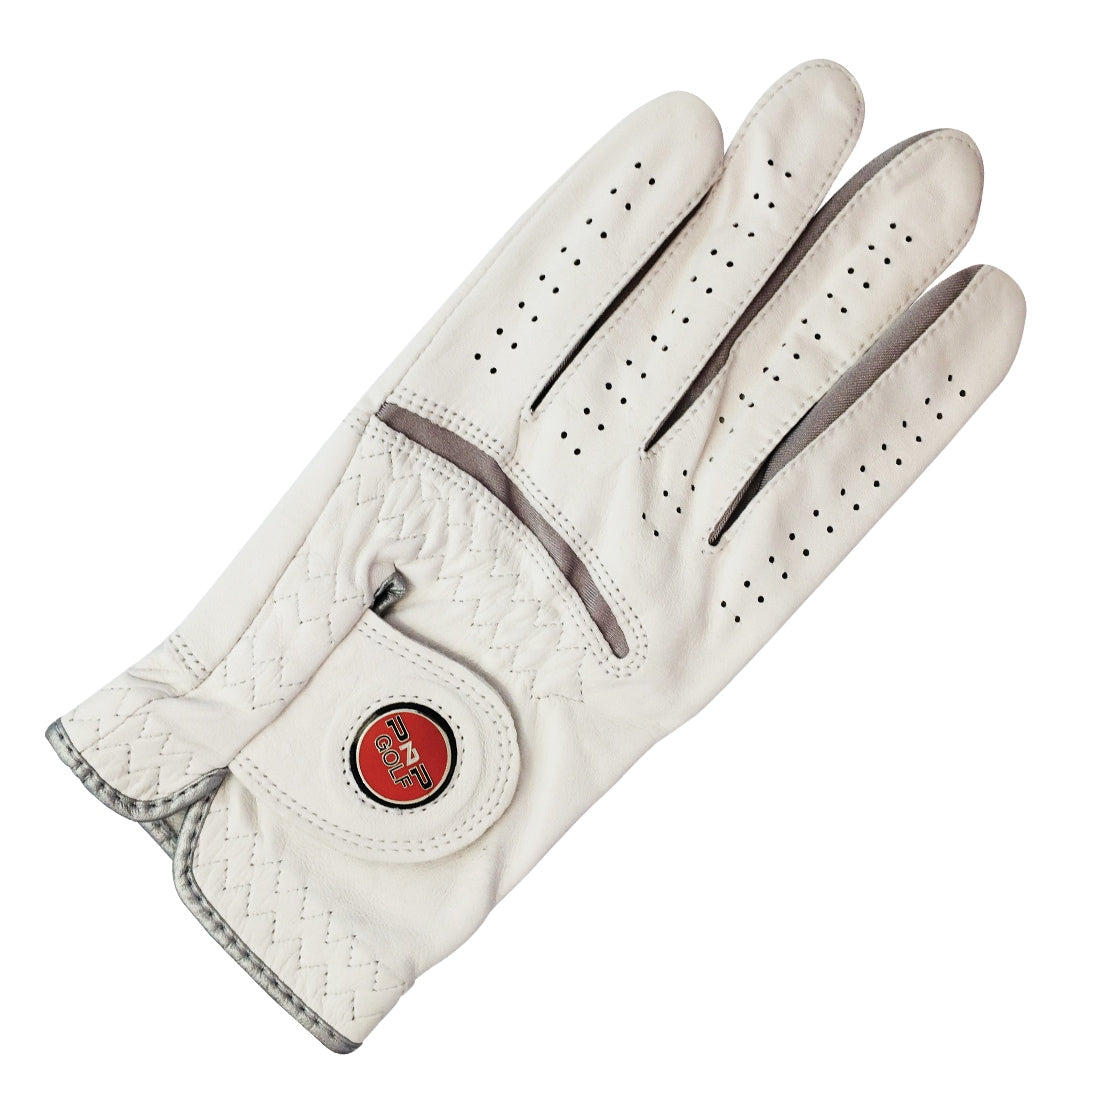 PnP most precise Leather nonslip Golf Glove with Magnetic Ball Marker